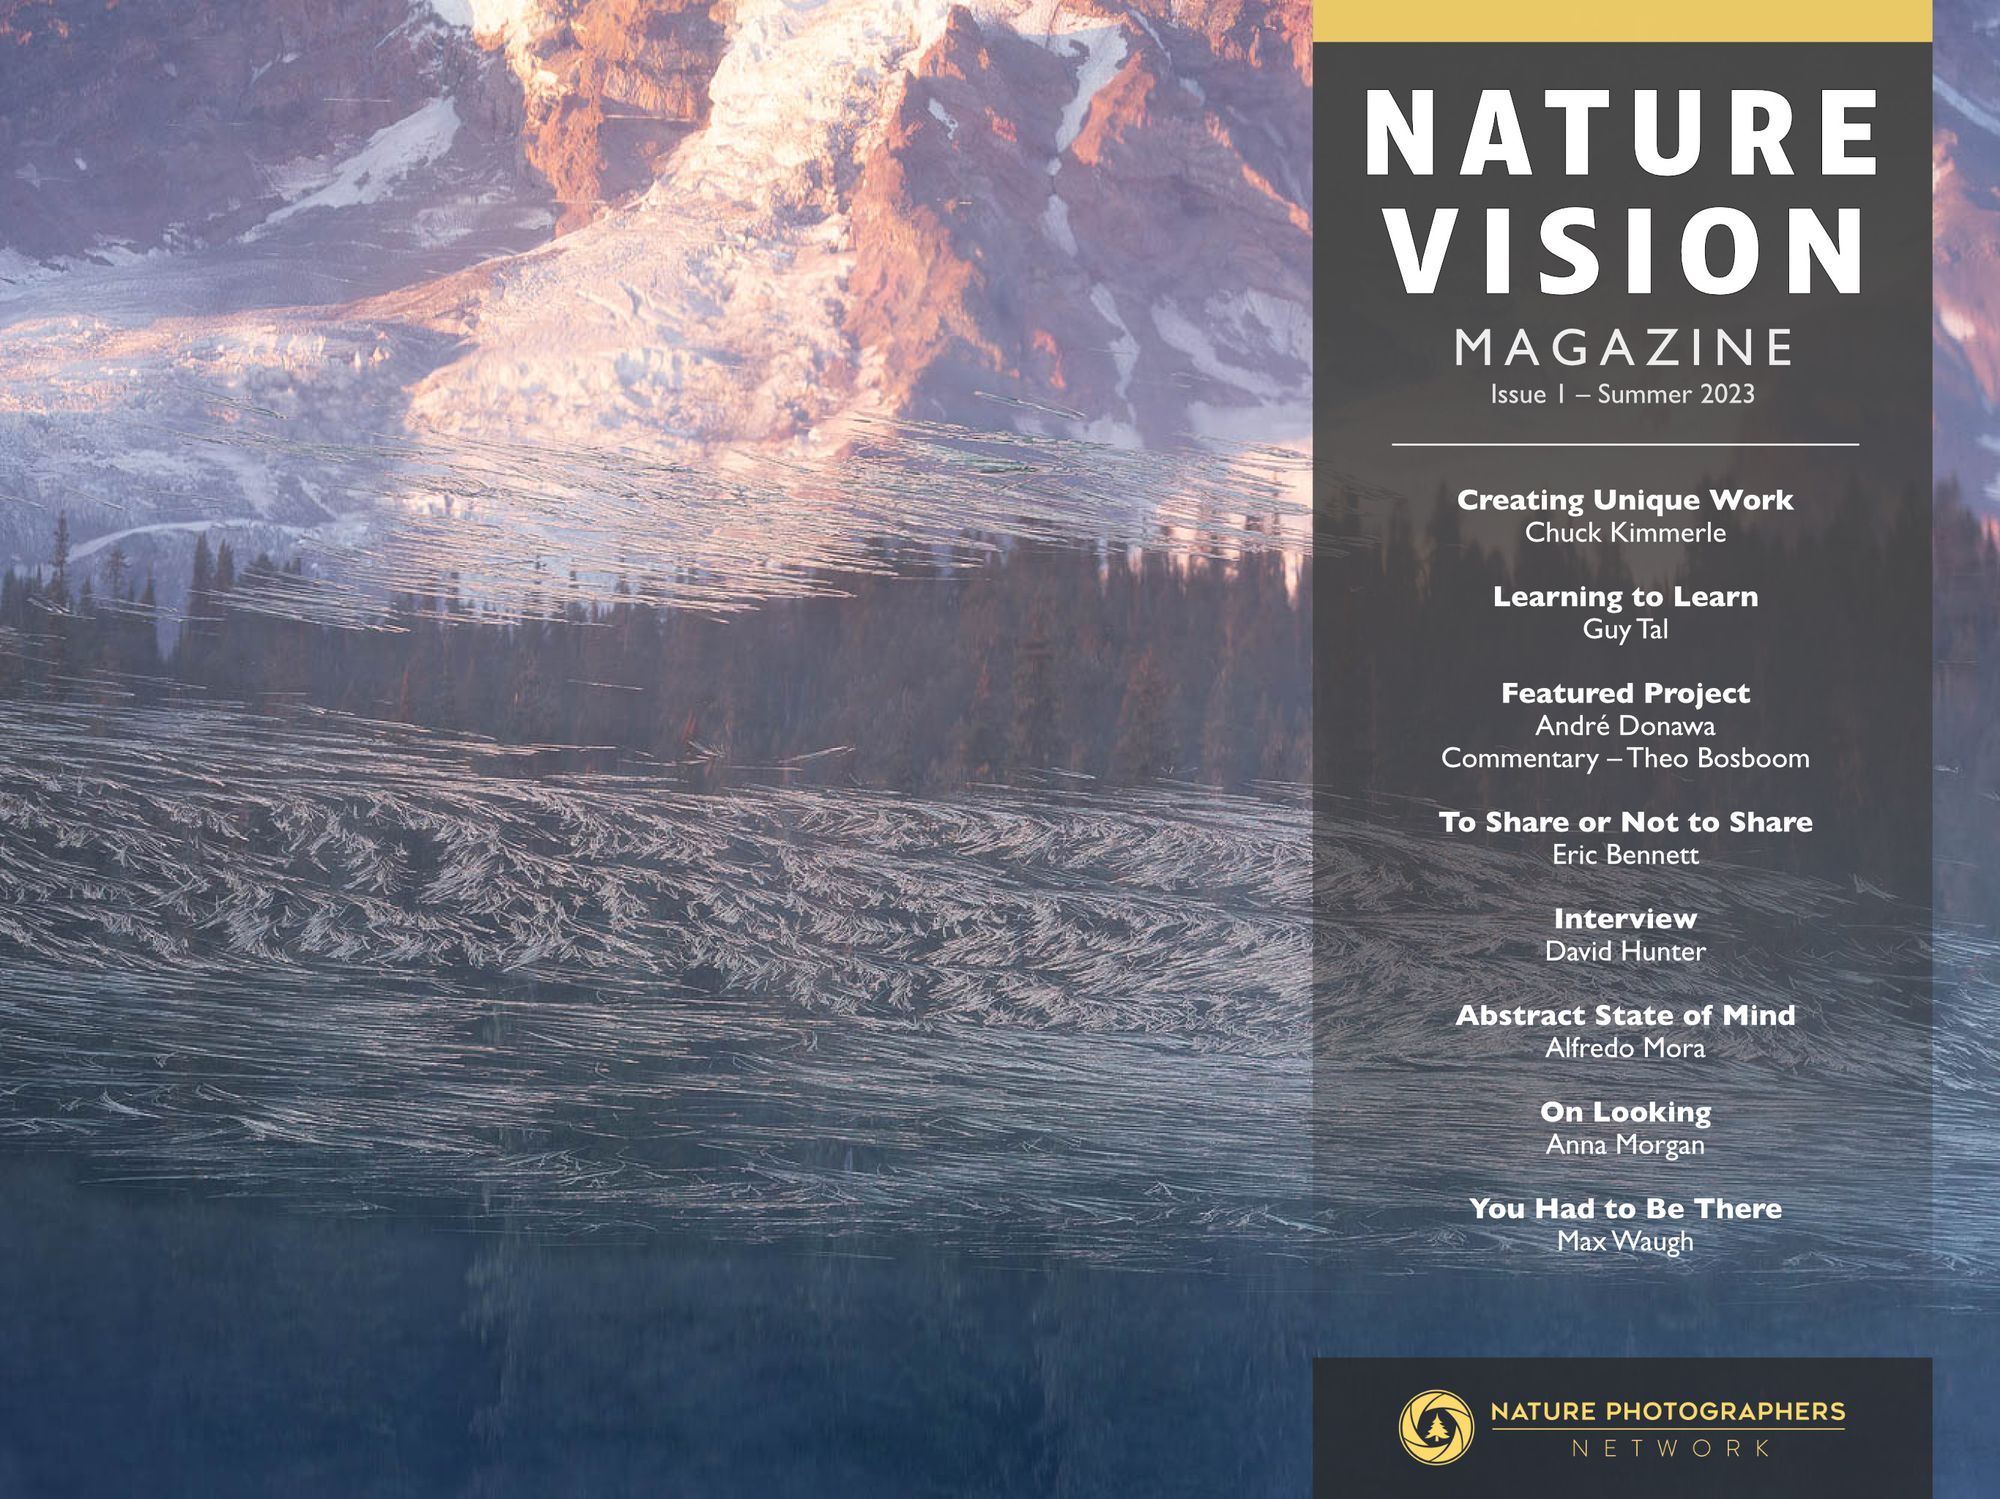 Nature Vision Magazine is here!